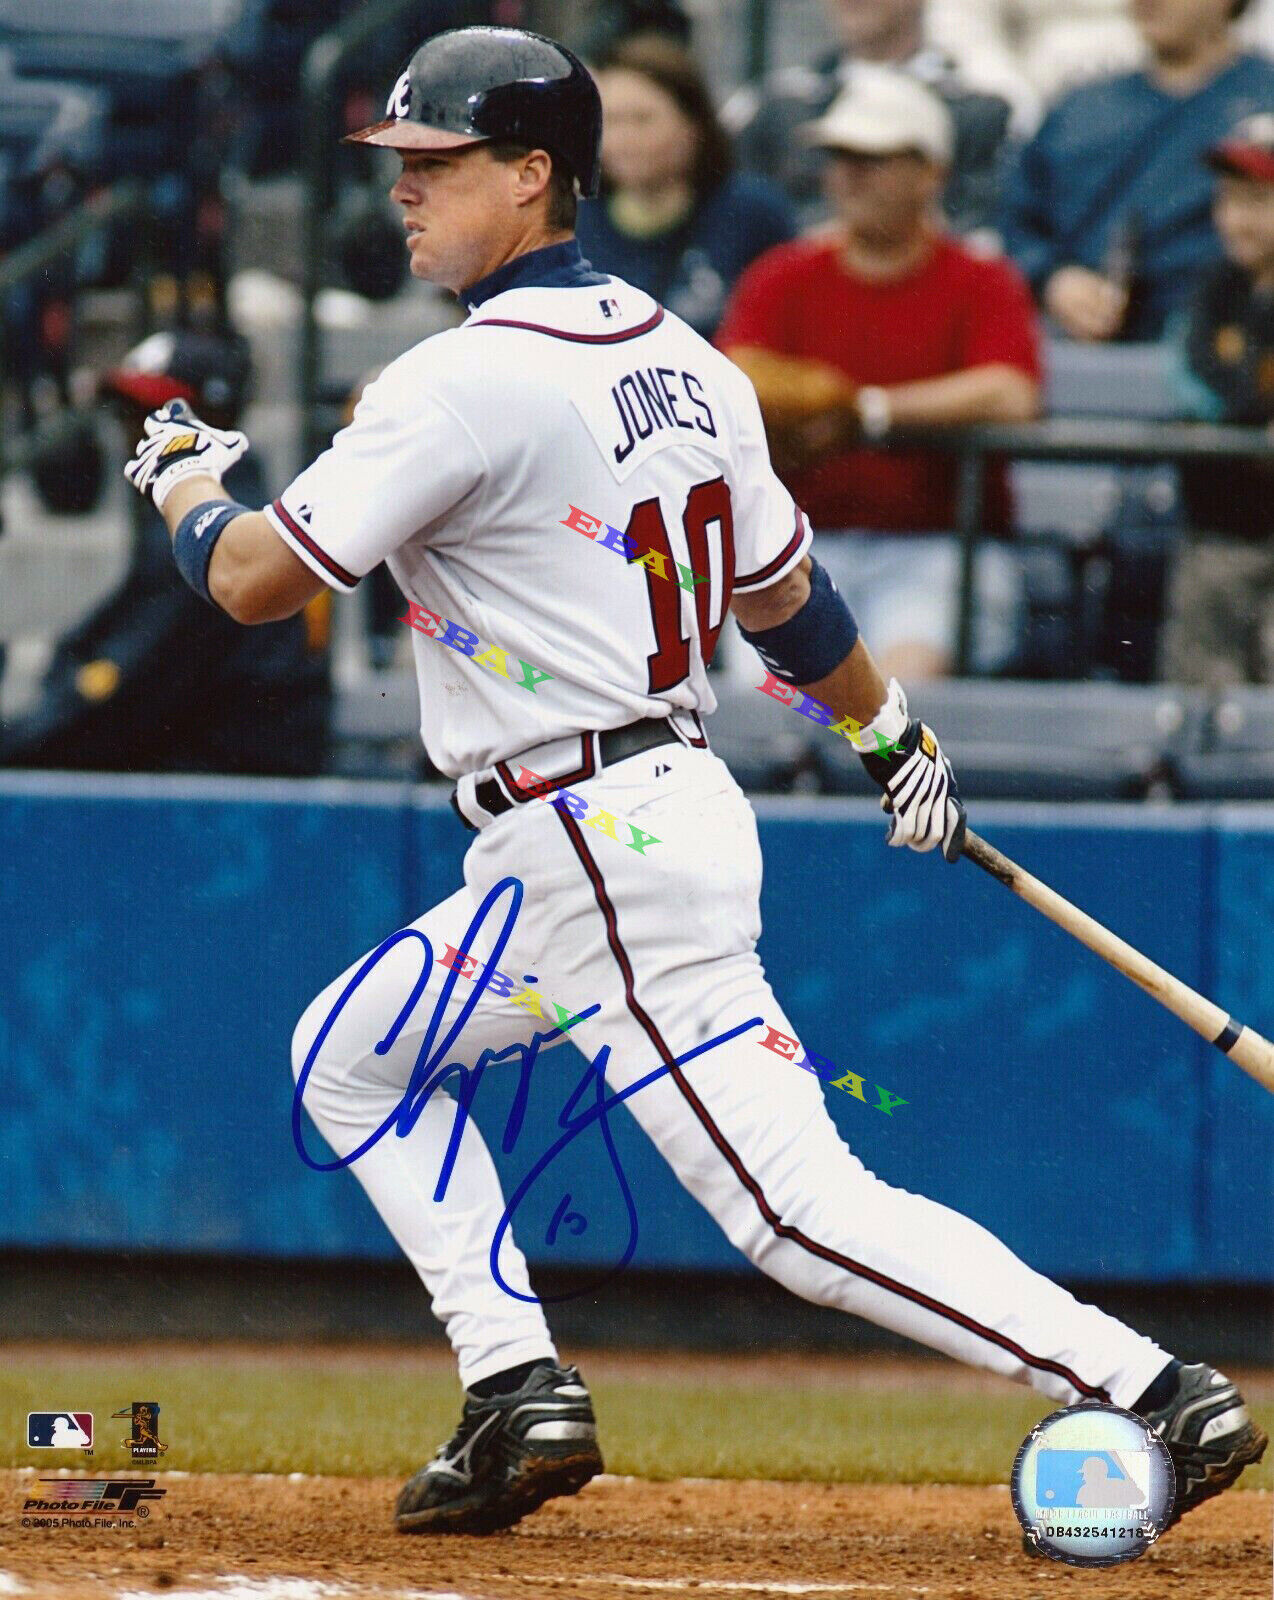 CHIPPER JONES ATL BRAVES Autographed Signed 8x10 Photo Poster painting Reprint